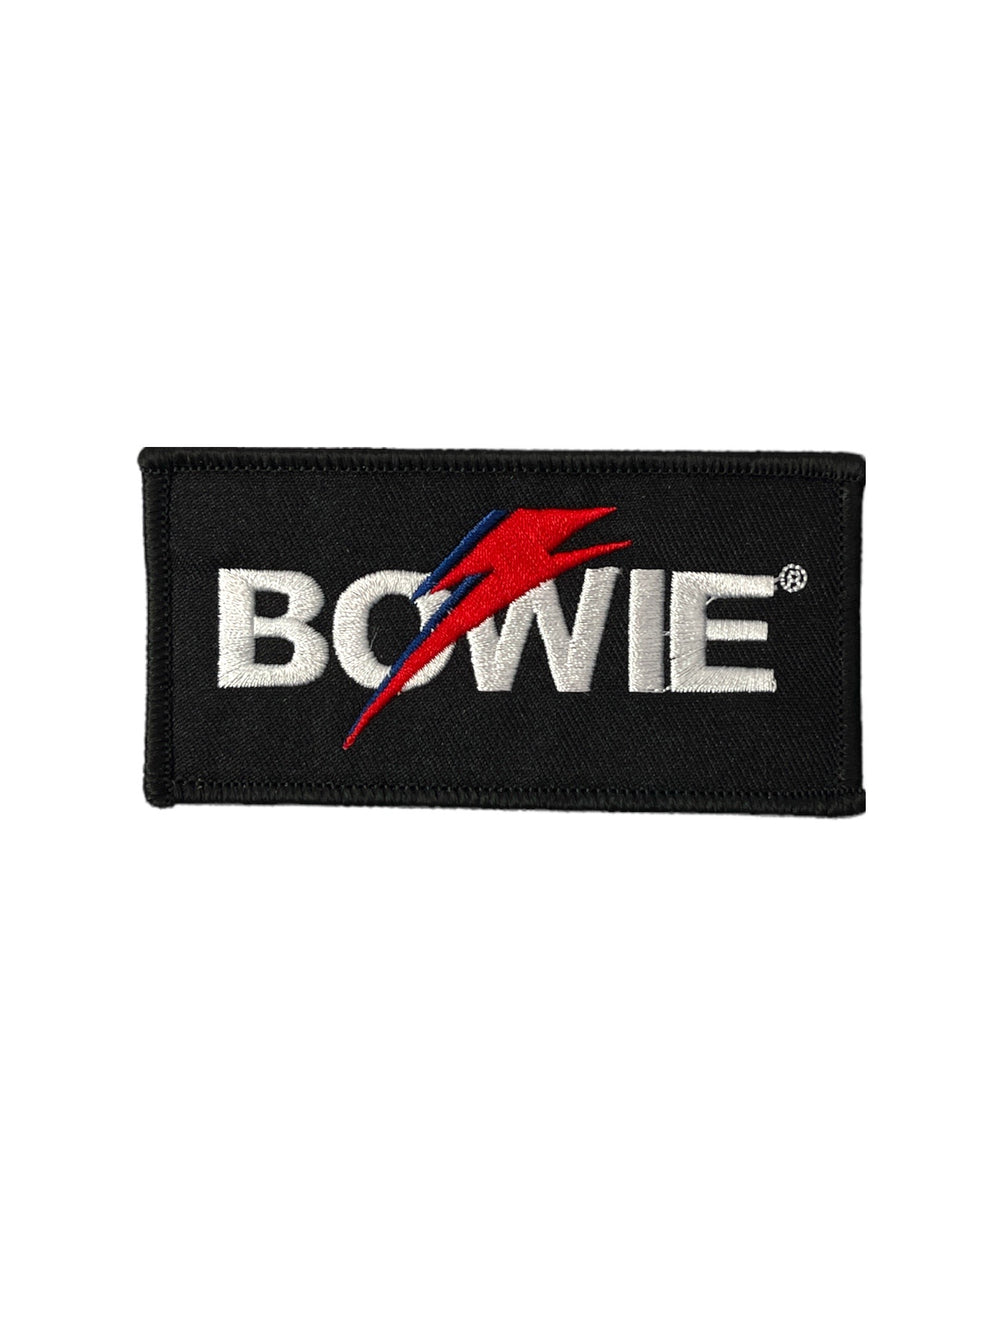 David Bowie Standard Flash Logo Official Woven Patch Brand New Official